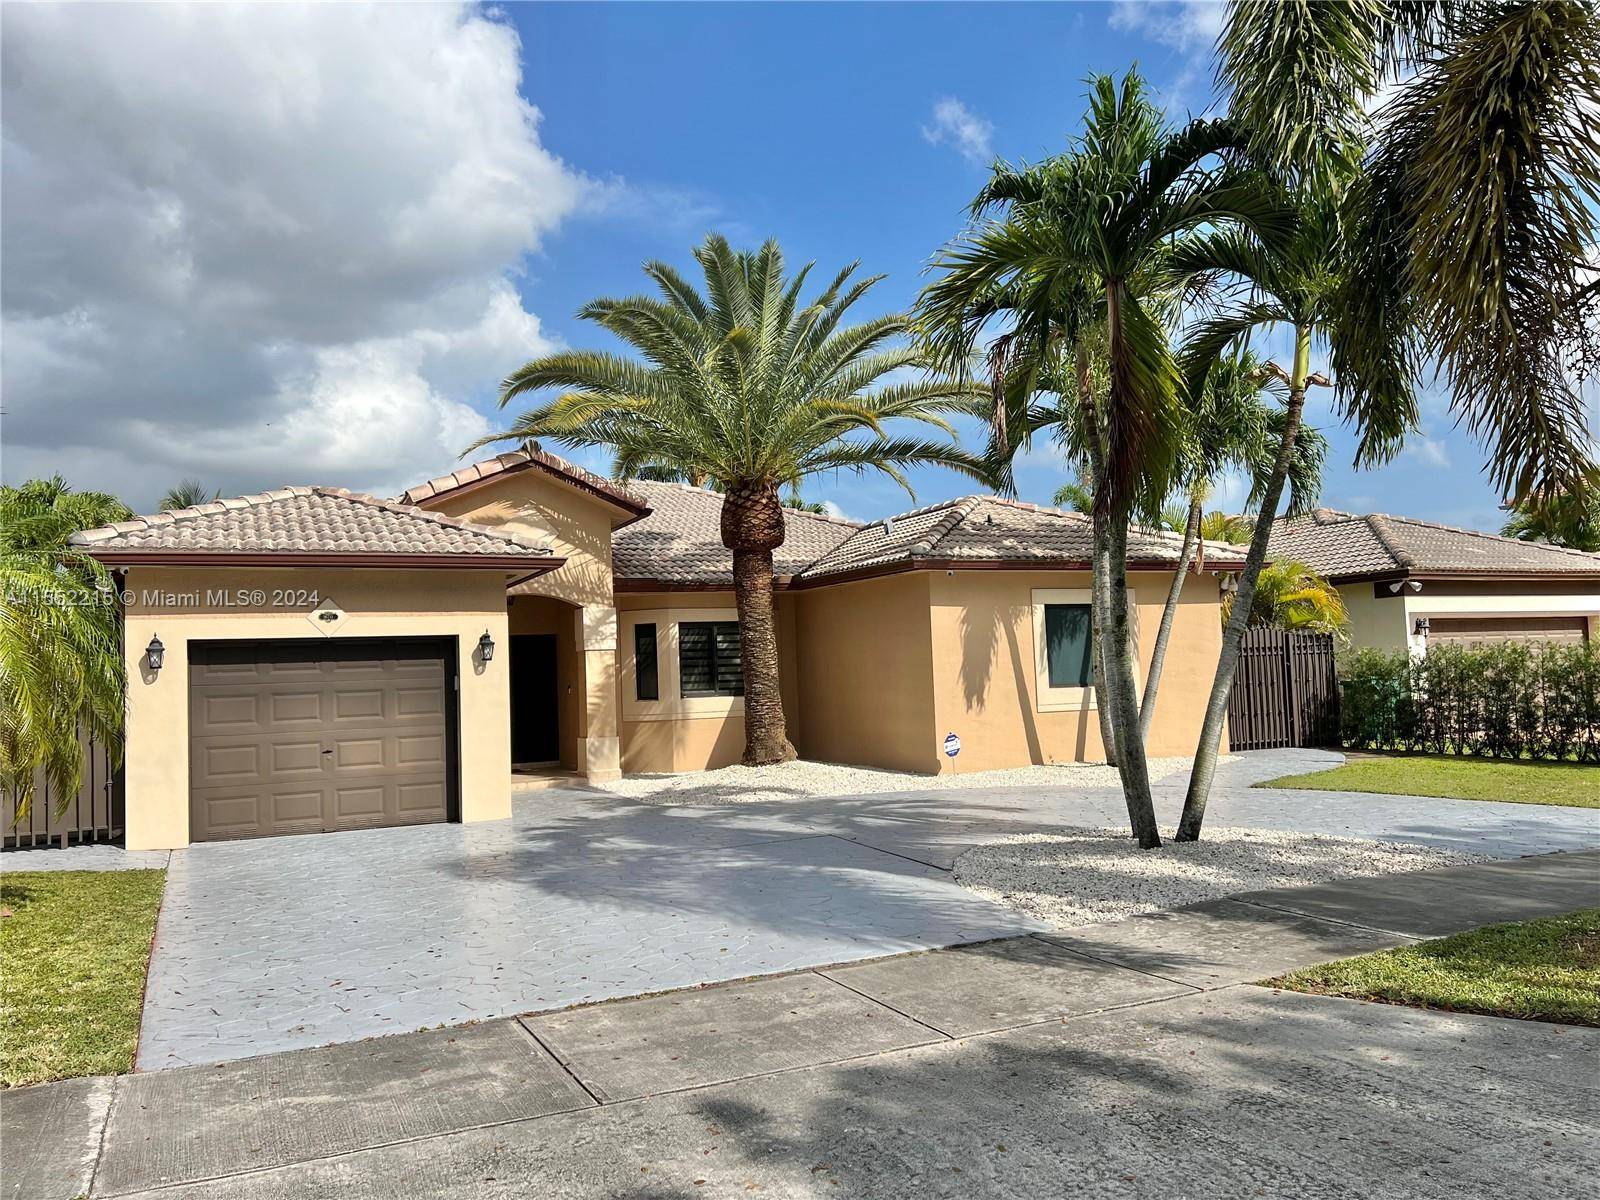 SPECTACULAR SINGLE FAMILY HOME FOR RENT, FEATURING 3 BEDROOMS, 2 BATHS AND FAMILY ROOM WITH A VERY CONVENIENT FLOOR PLAN, A BEAUTIFUL COVERED BACKYARD WITH CEILING FANS PERFECT FOR ENTERTAINING ...